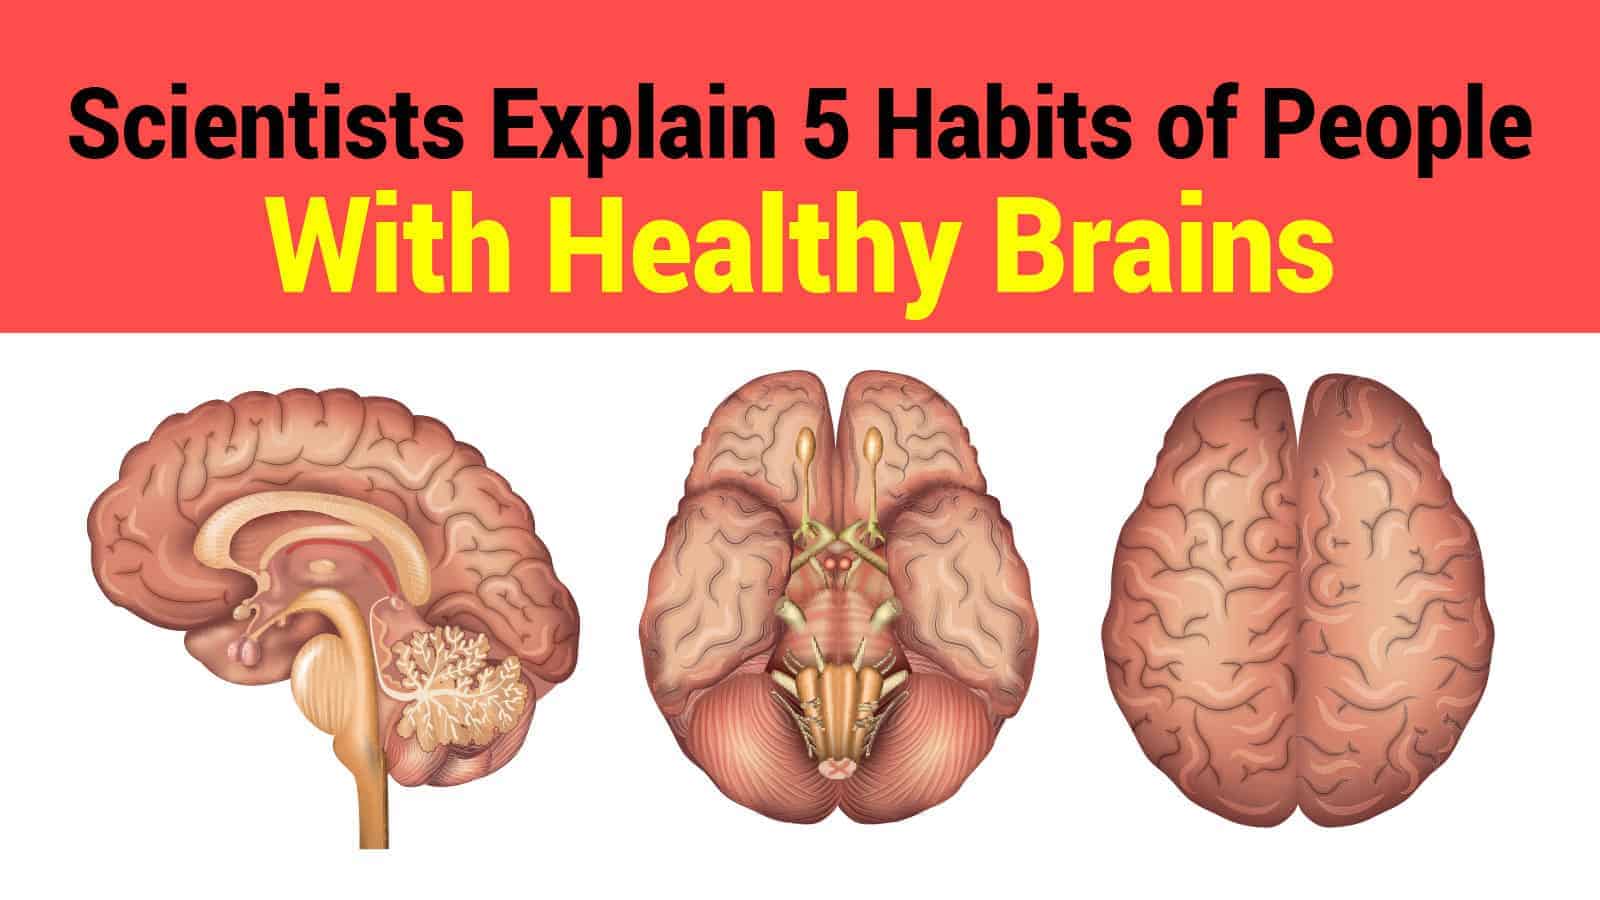 Scientists Explain 5 Habits of People With Healthy Brains